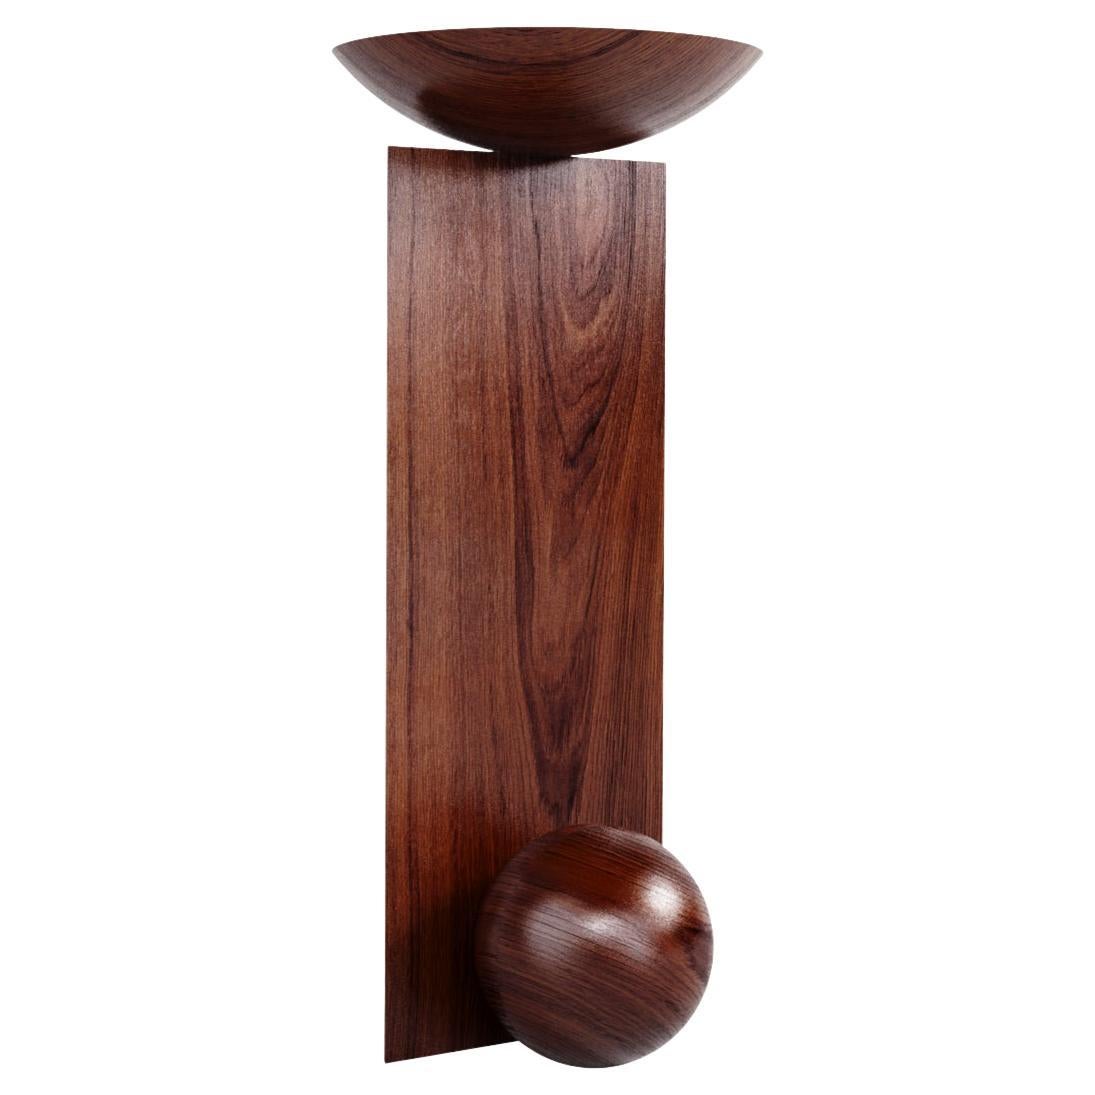 Coito Sculptural Side Table in Tropical Hardwood by Pedro Paulo Venzon